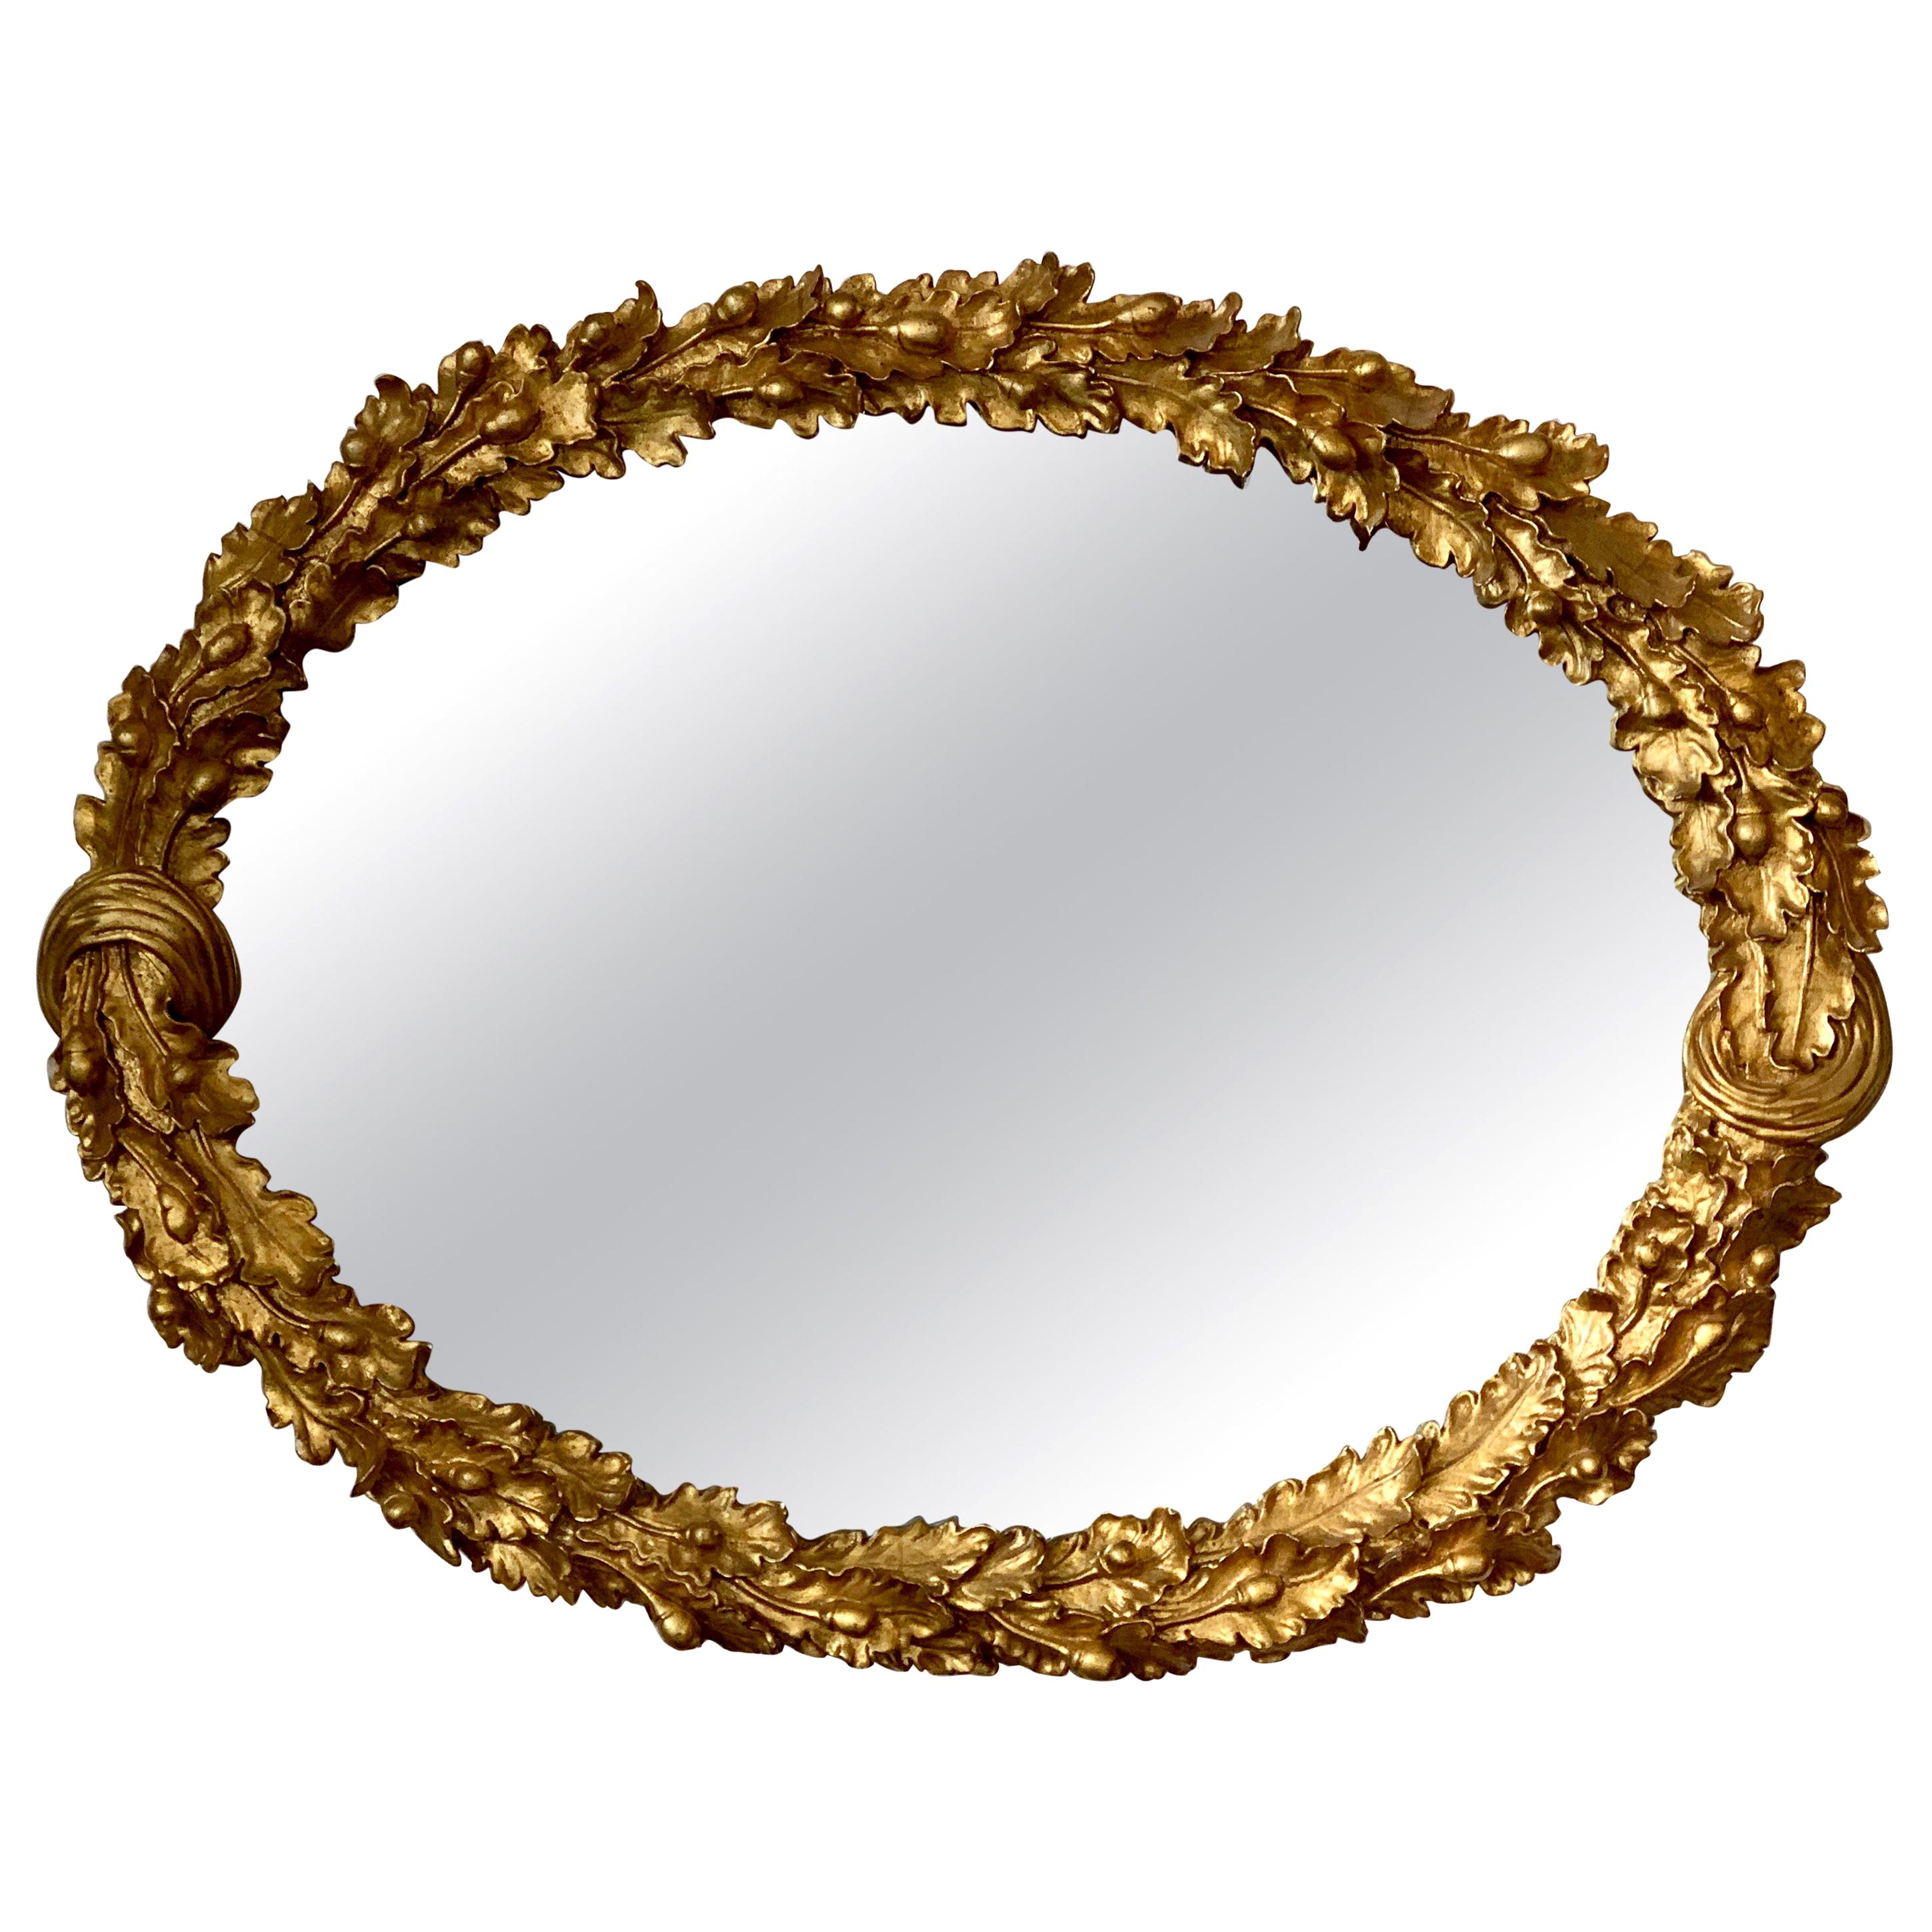 Louis XVI Style Carved Giltwood Oval Mirror with Oak Leaves and Acorns